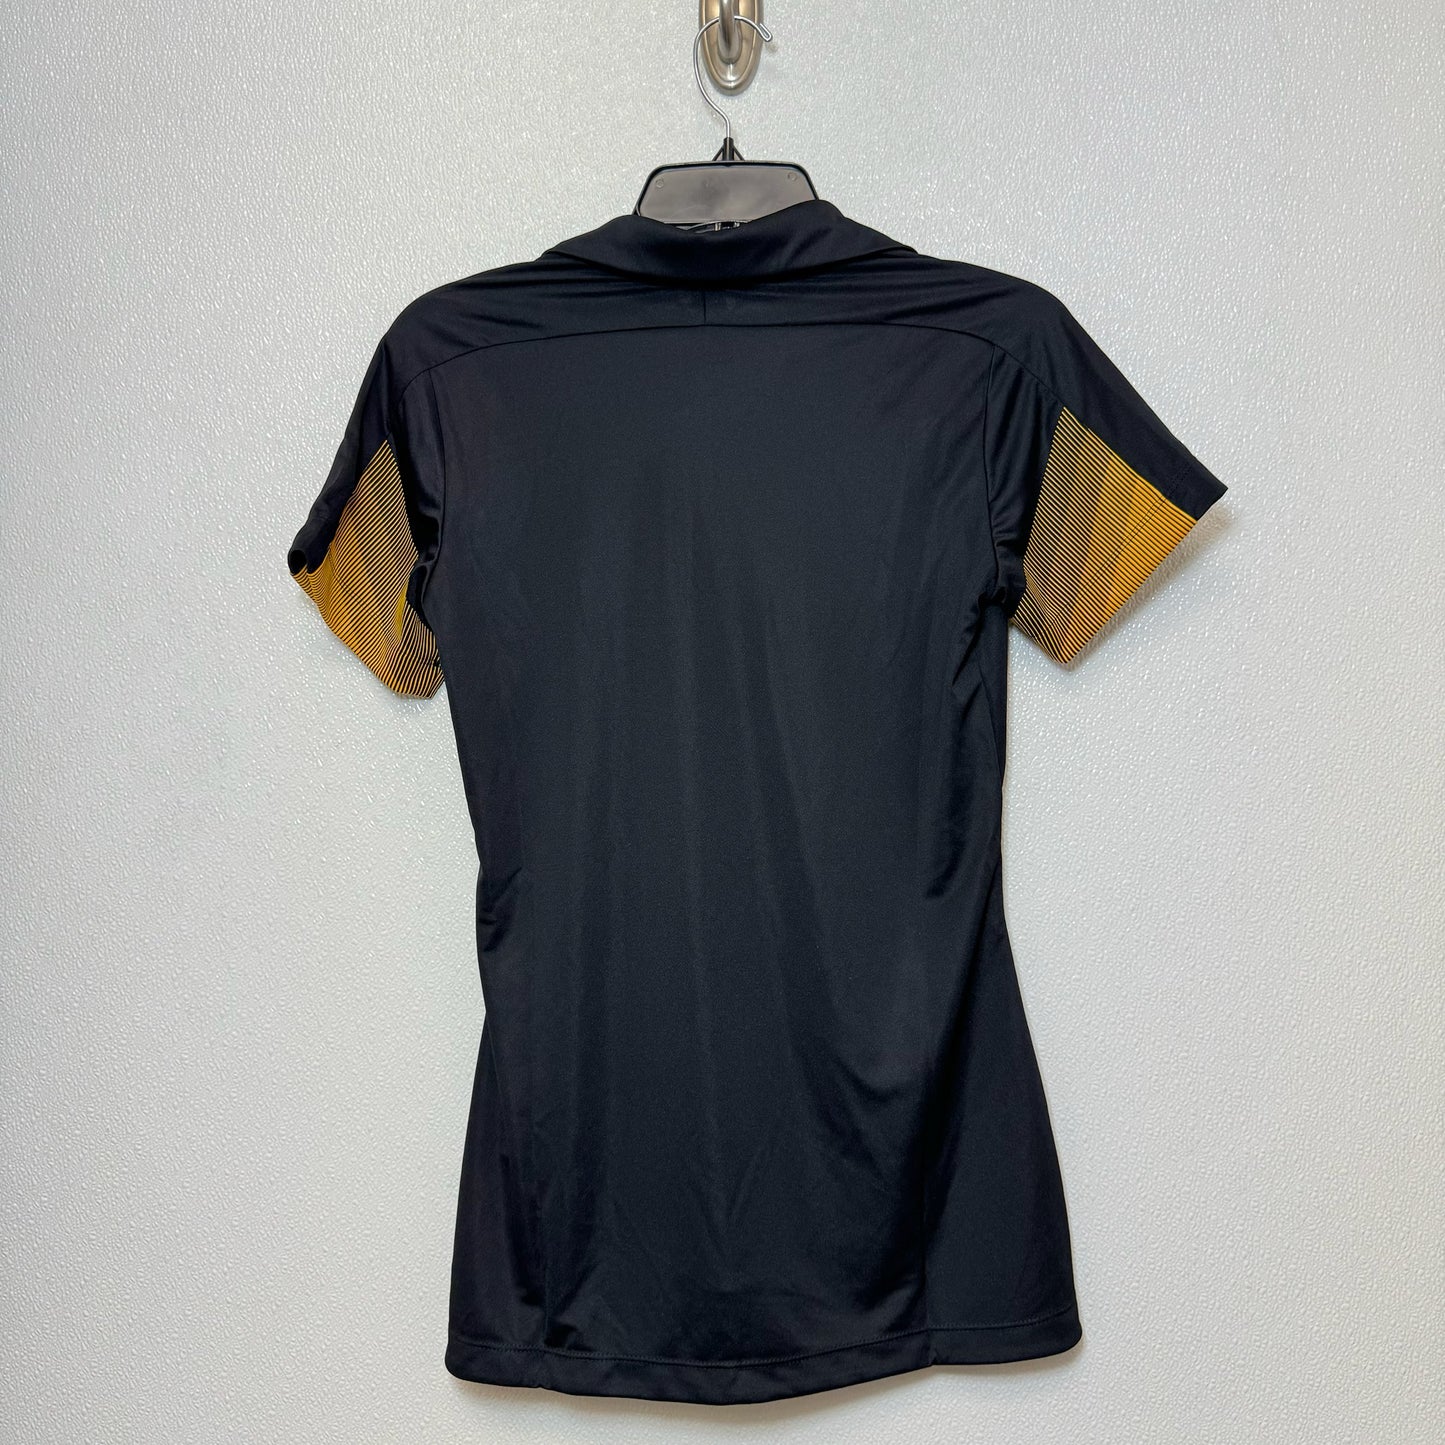 Athletic Top Short Sleeve By Adidas